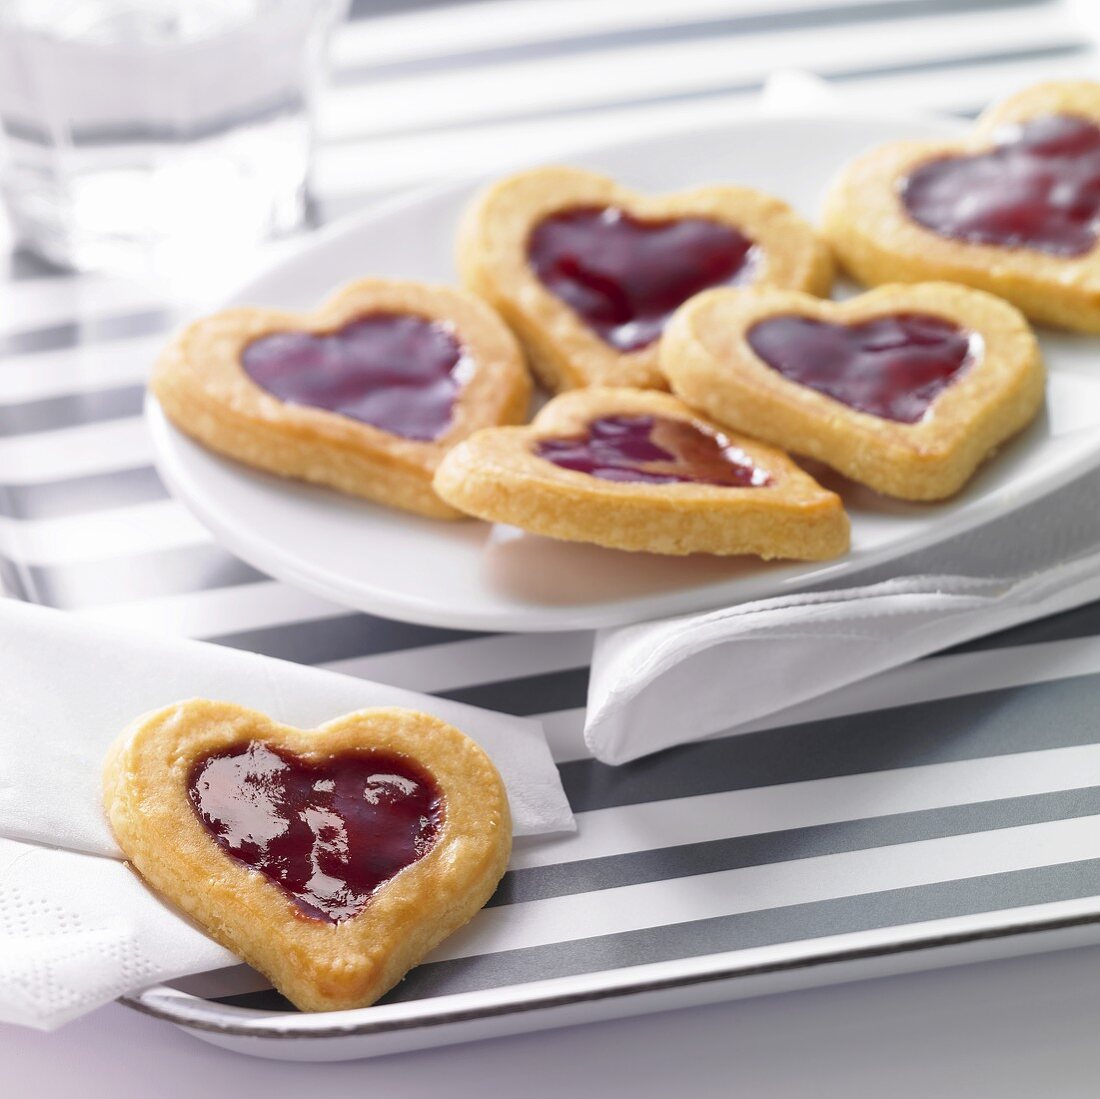 Heart-shaped jam biscuits